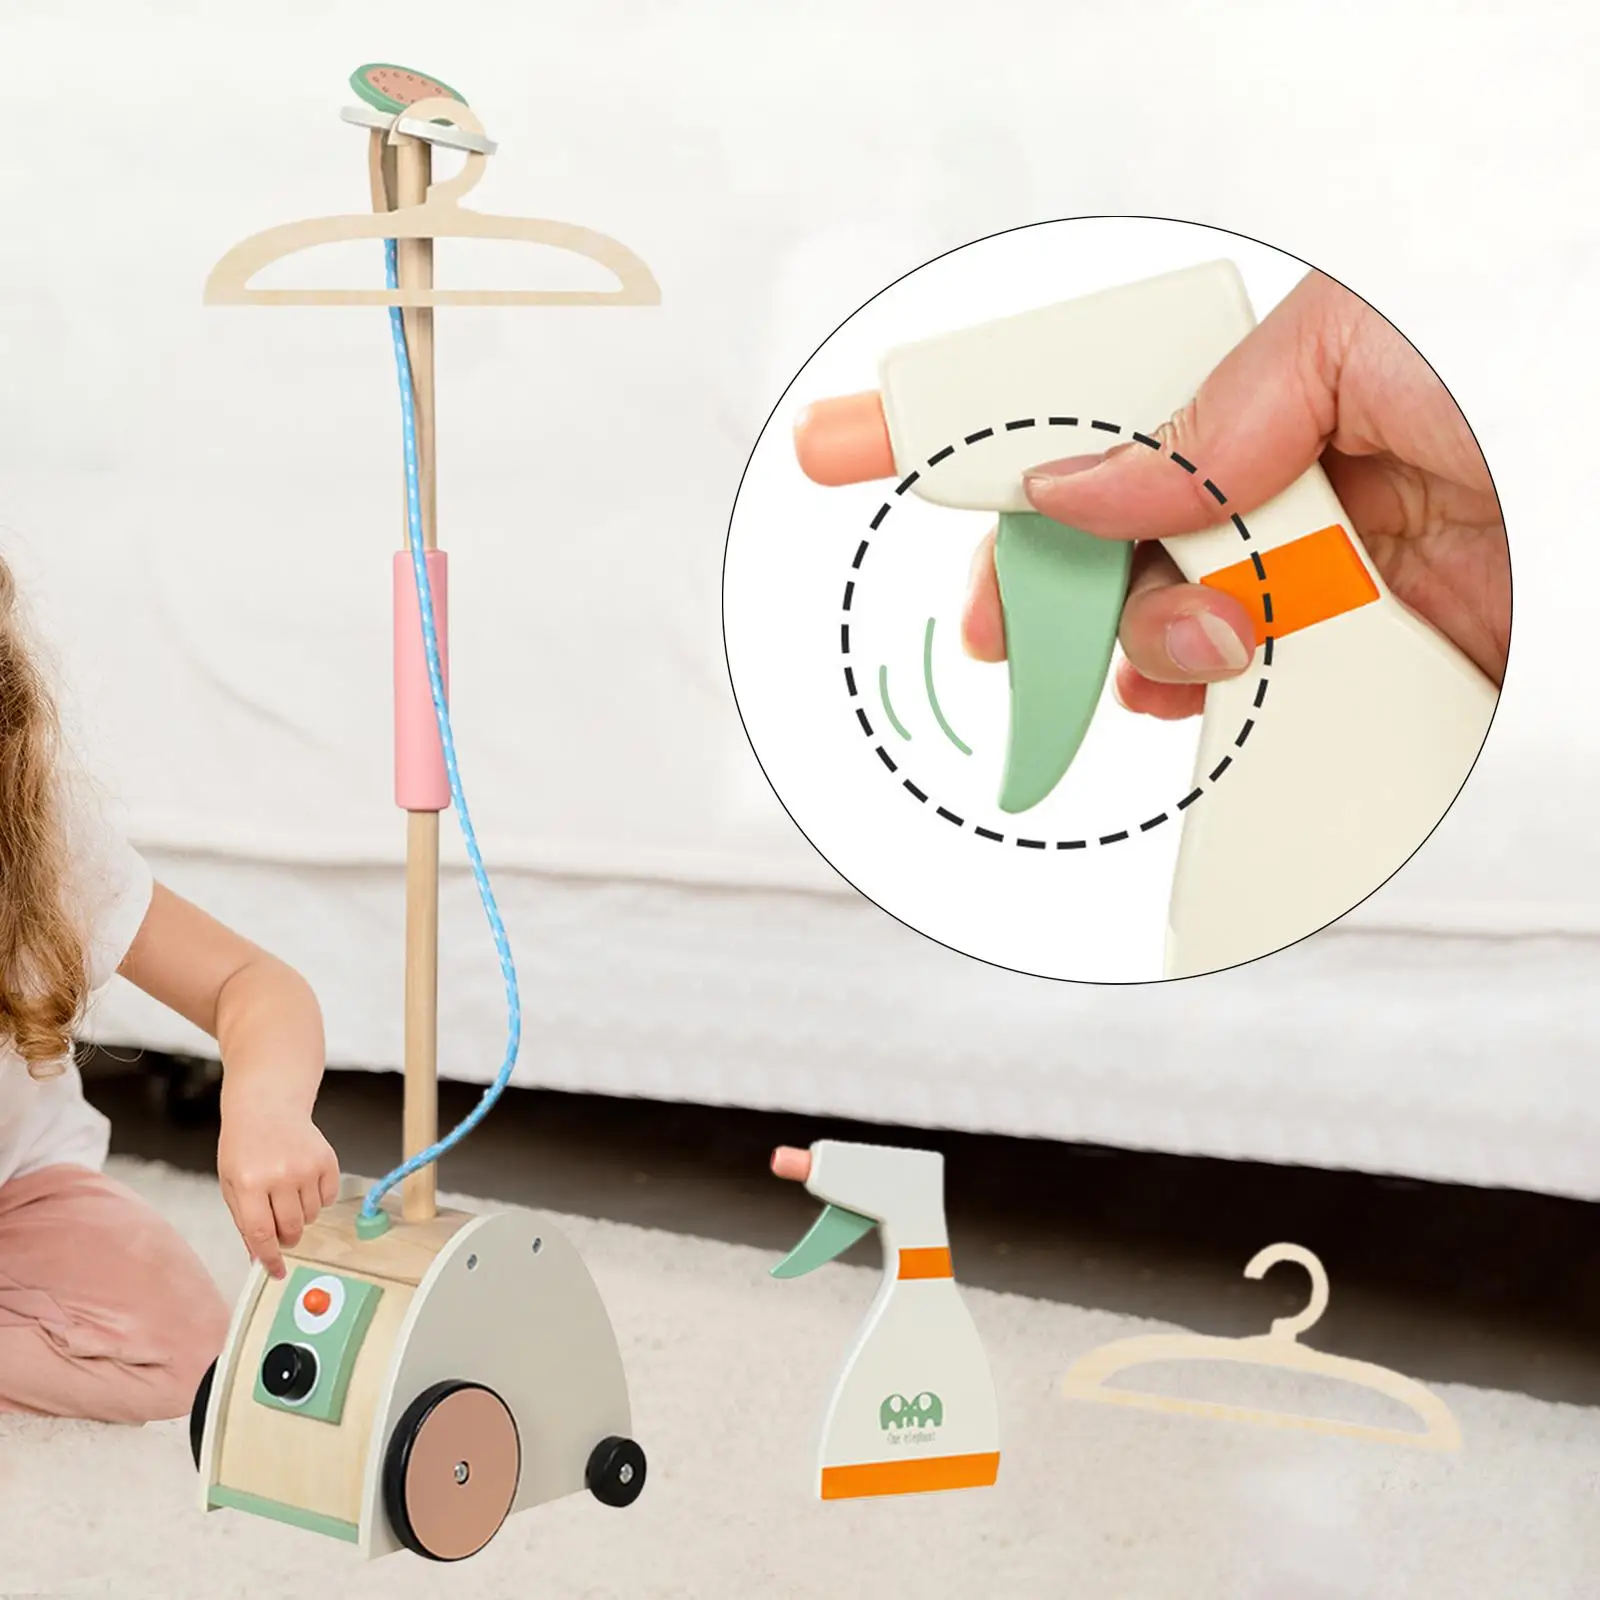 Mini Housekeeping Playset Educational Toy Doll House Role Play Toddler Toy Garment Steamer for Boys Girls Holiday Present